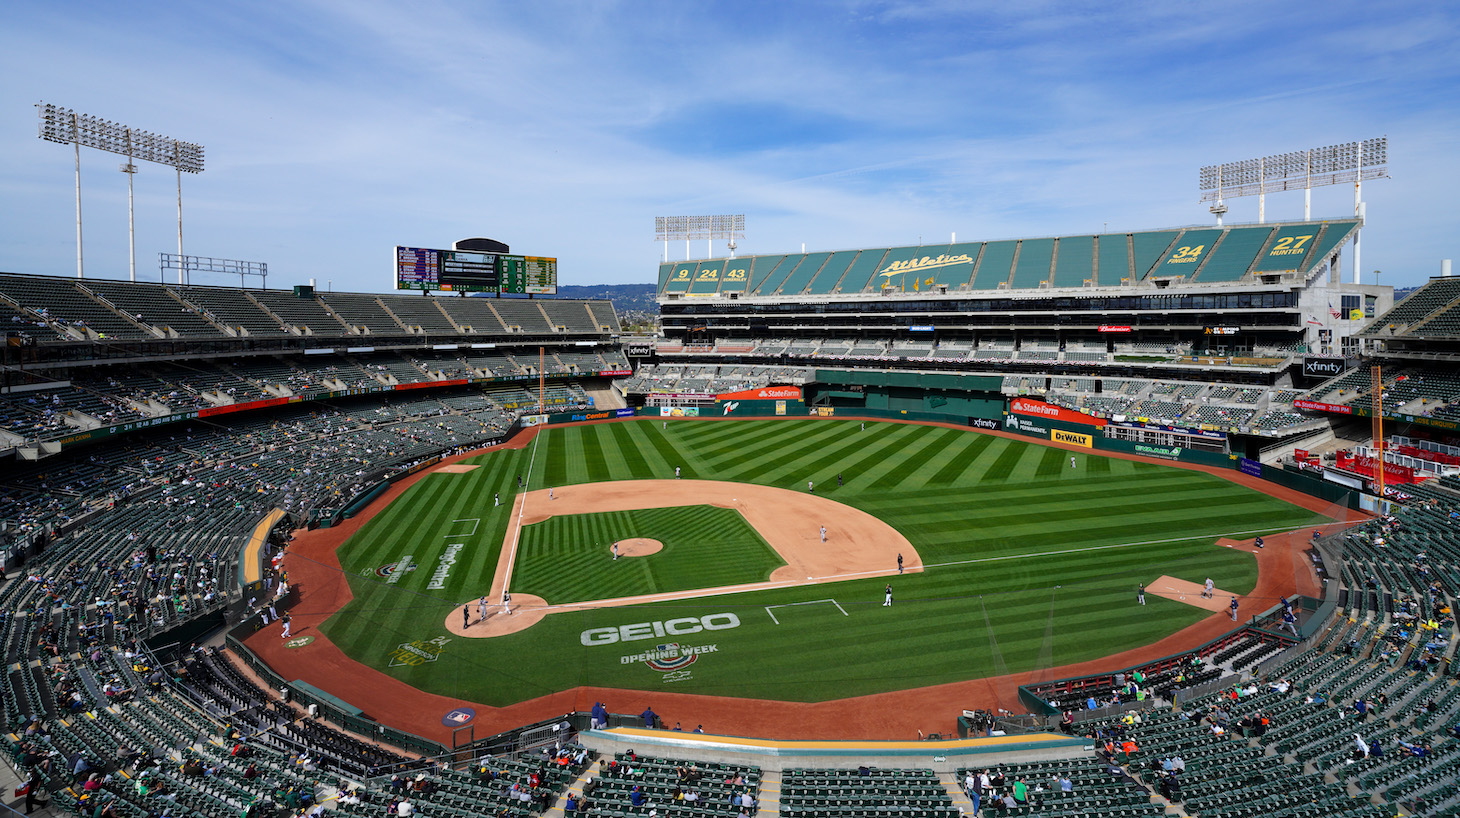 OAKLAND, CALIFORNIA - APRIL 04: A general view of RingCentral Coliseum during the game between the Oakland Athletics and the Houston Astros at RingCentral Coliseum on April 04, 2021 in Oakland, California. (Photo by Daniel Shirey/Getty Images)